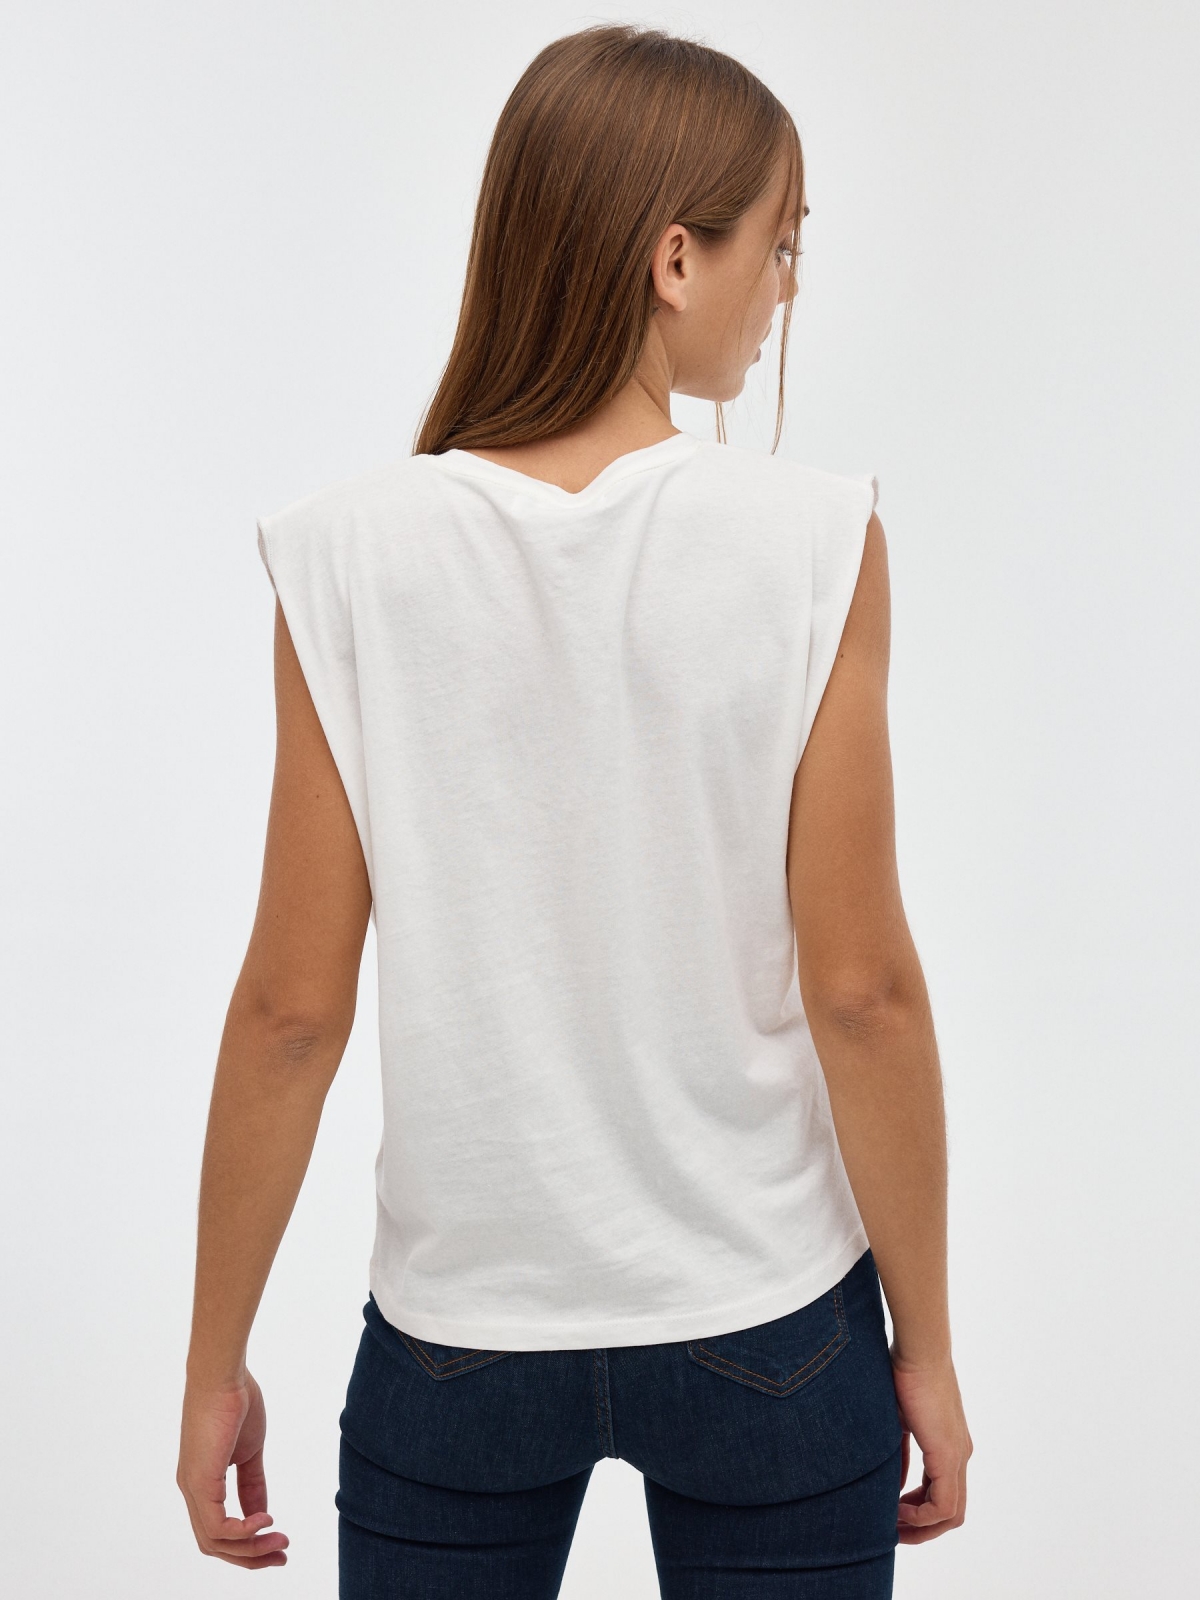 Sleeveless tiger t-shirt off white middle back view